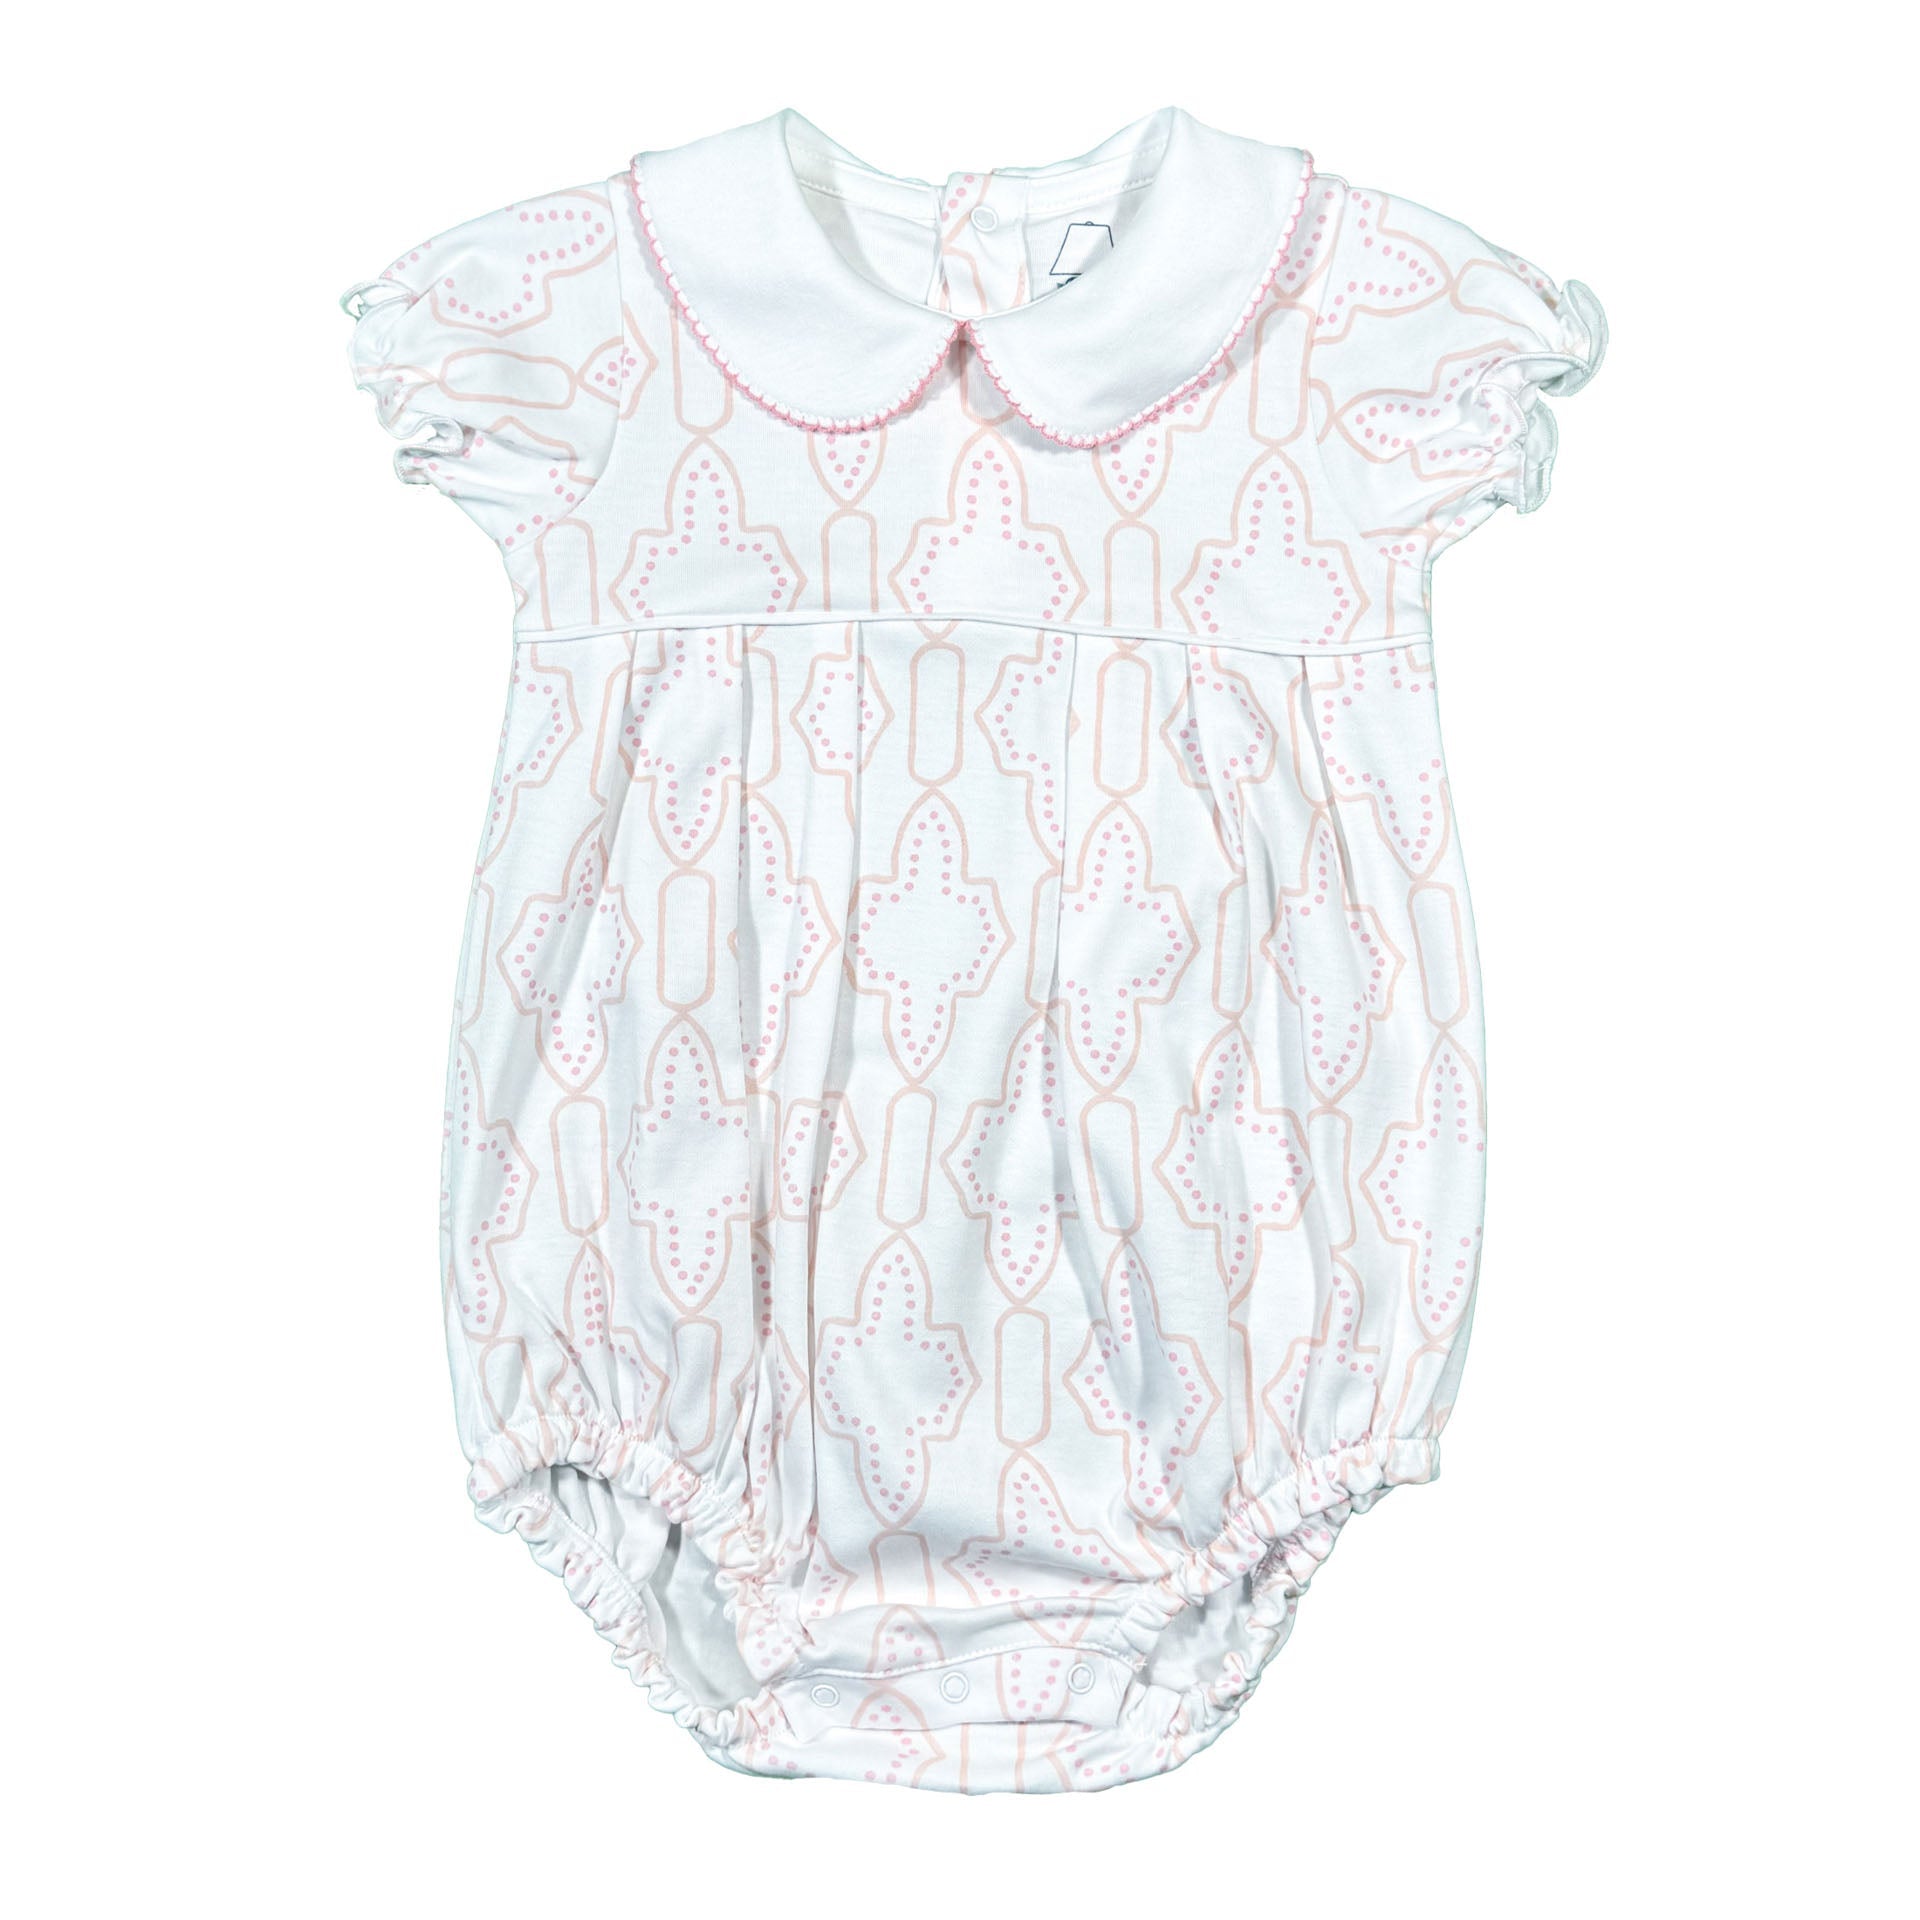 Girls SS Pleated Bubble